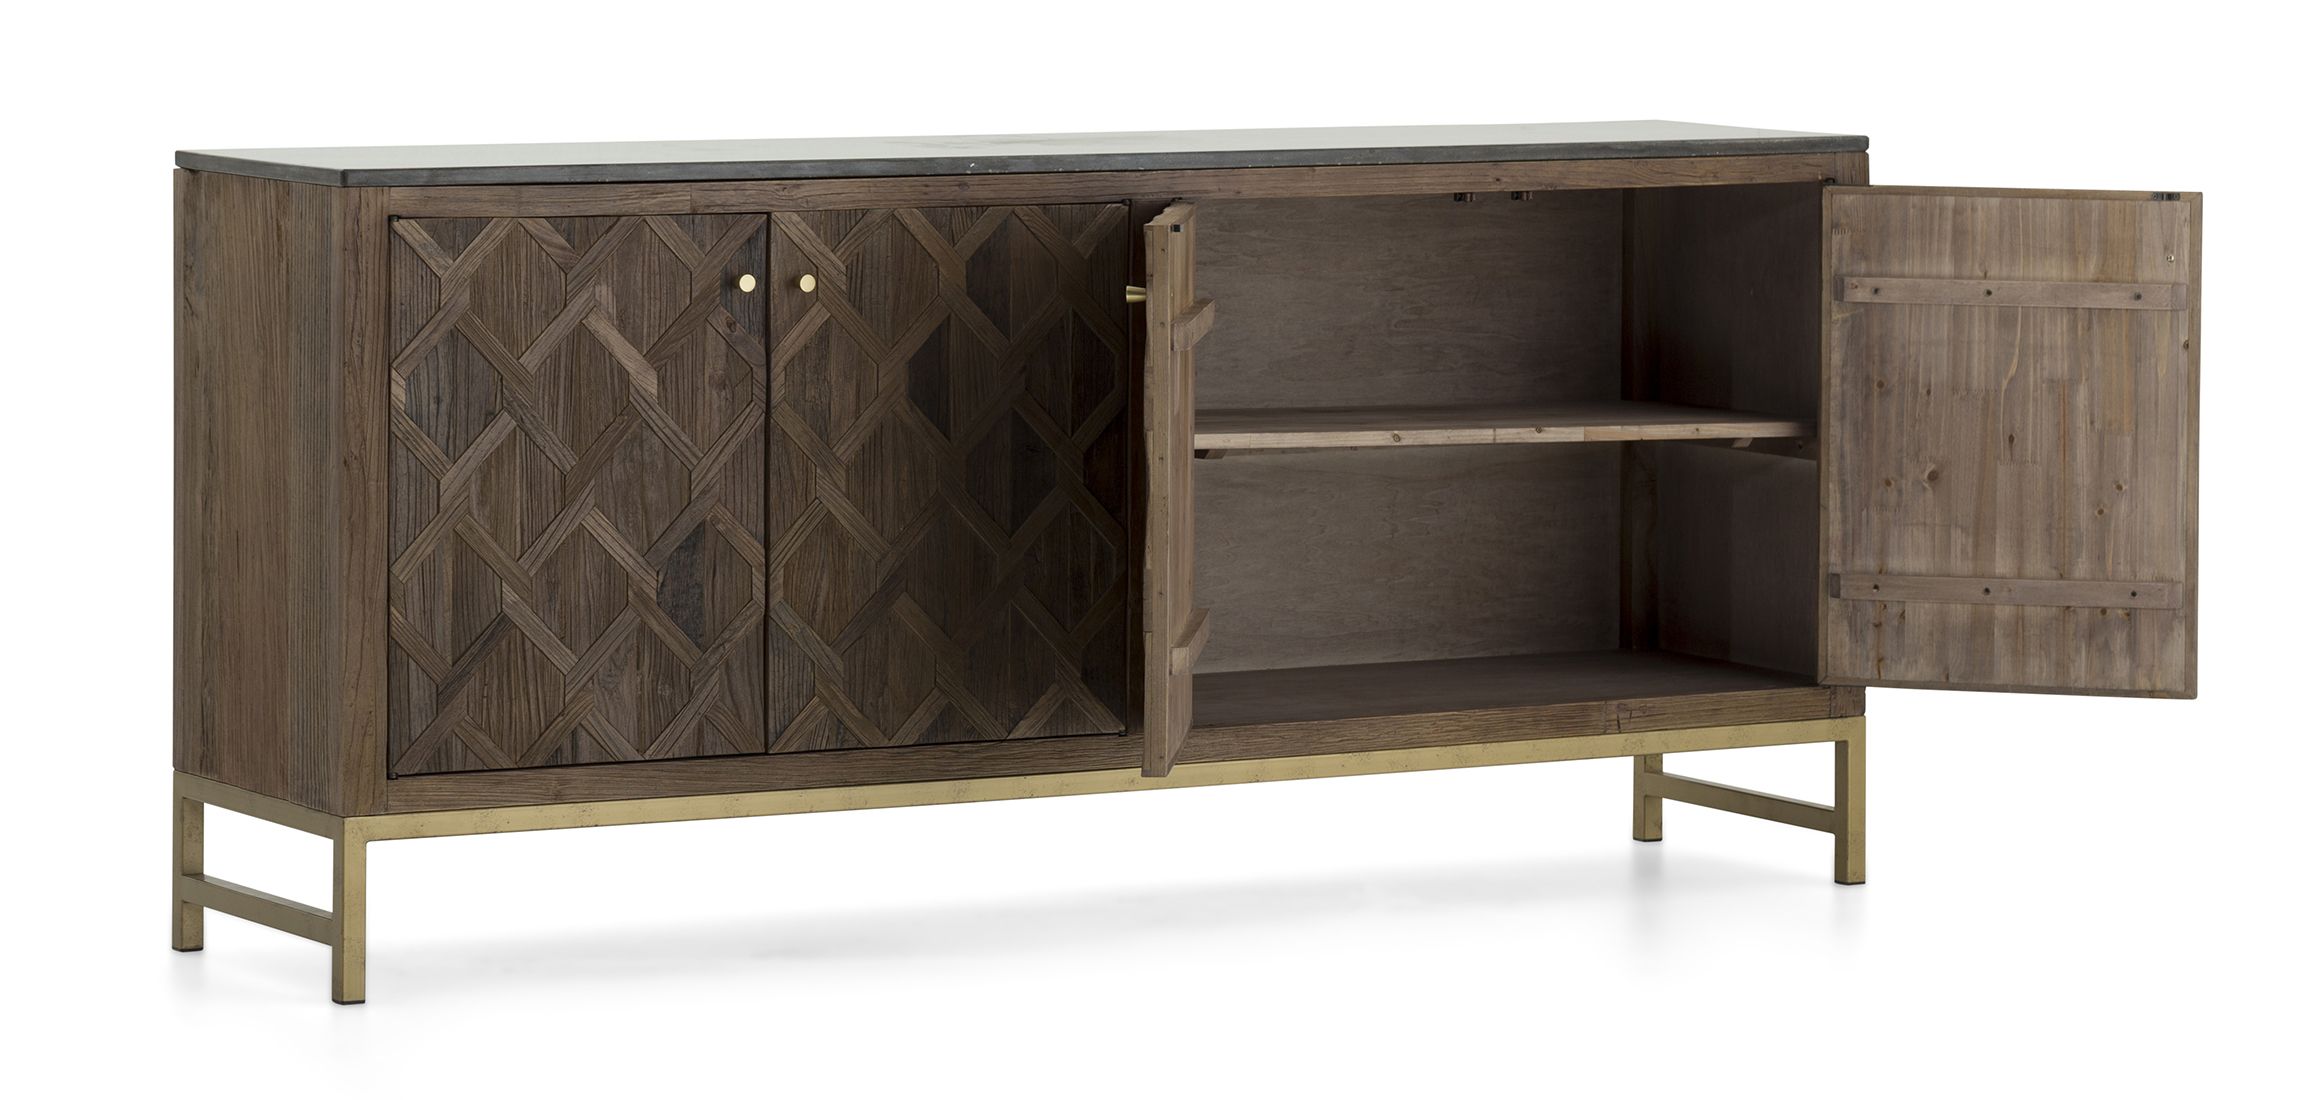 Shingo – Sideboard, 4 Doors | Flamant Intended For Most Up To Date Adkins Sideboards (Photo 4 of 20)